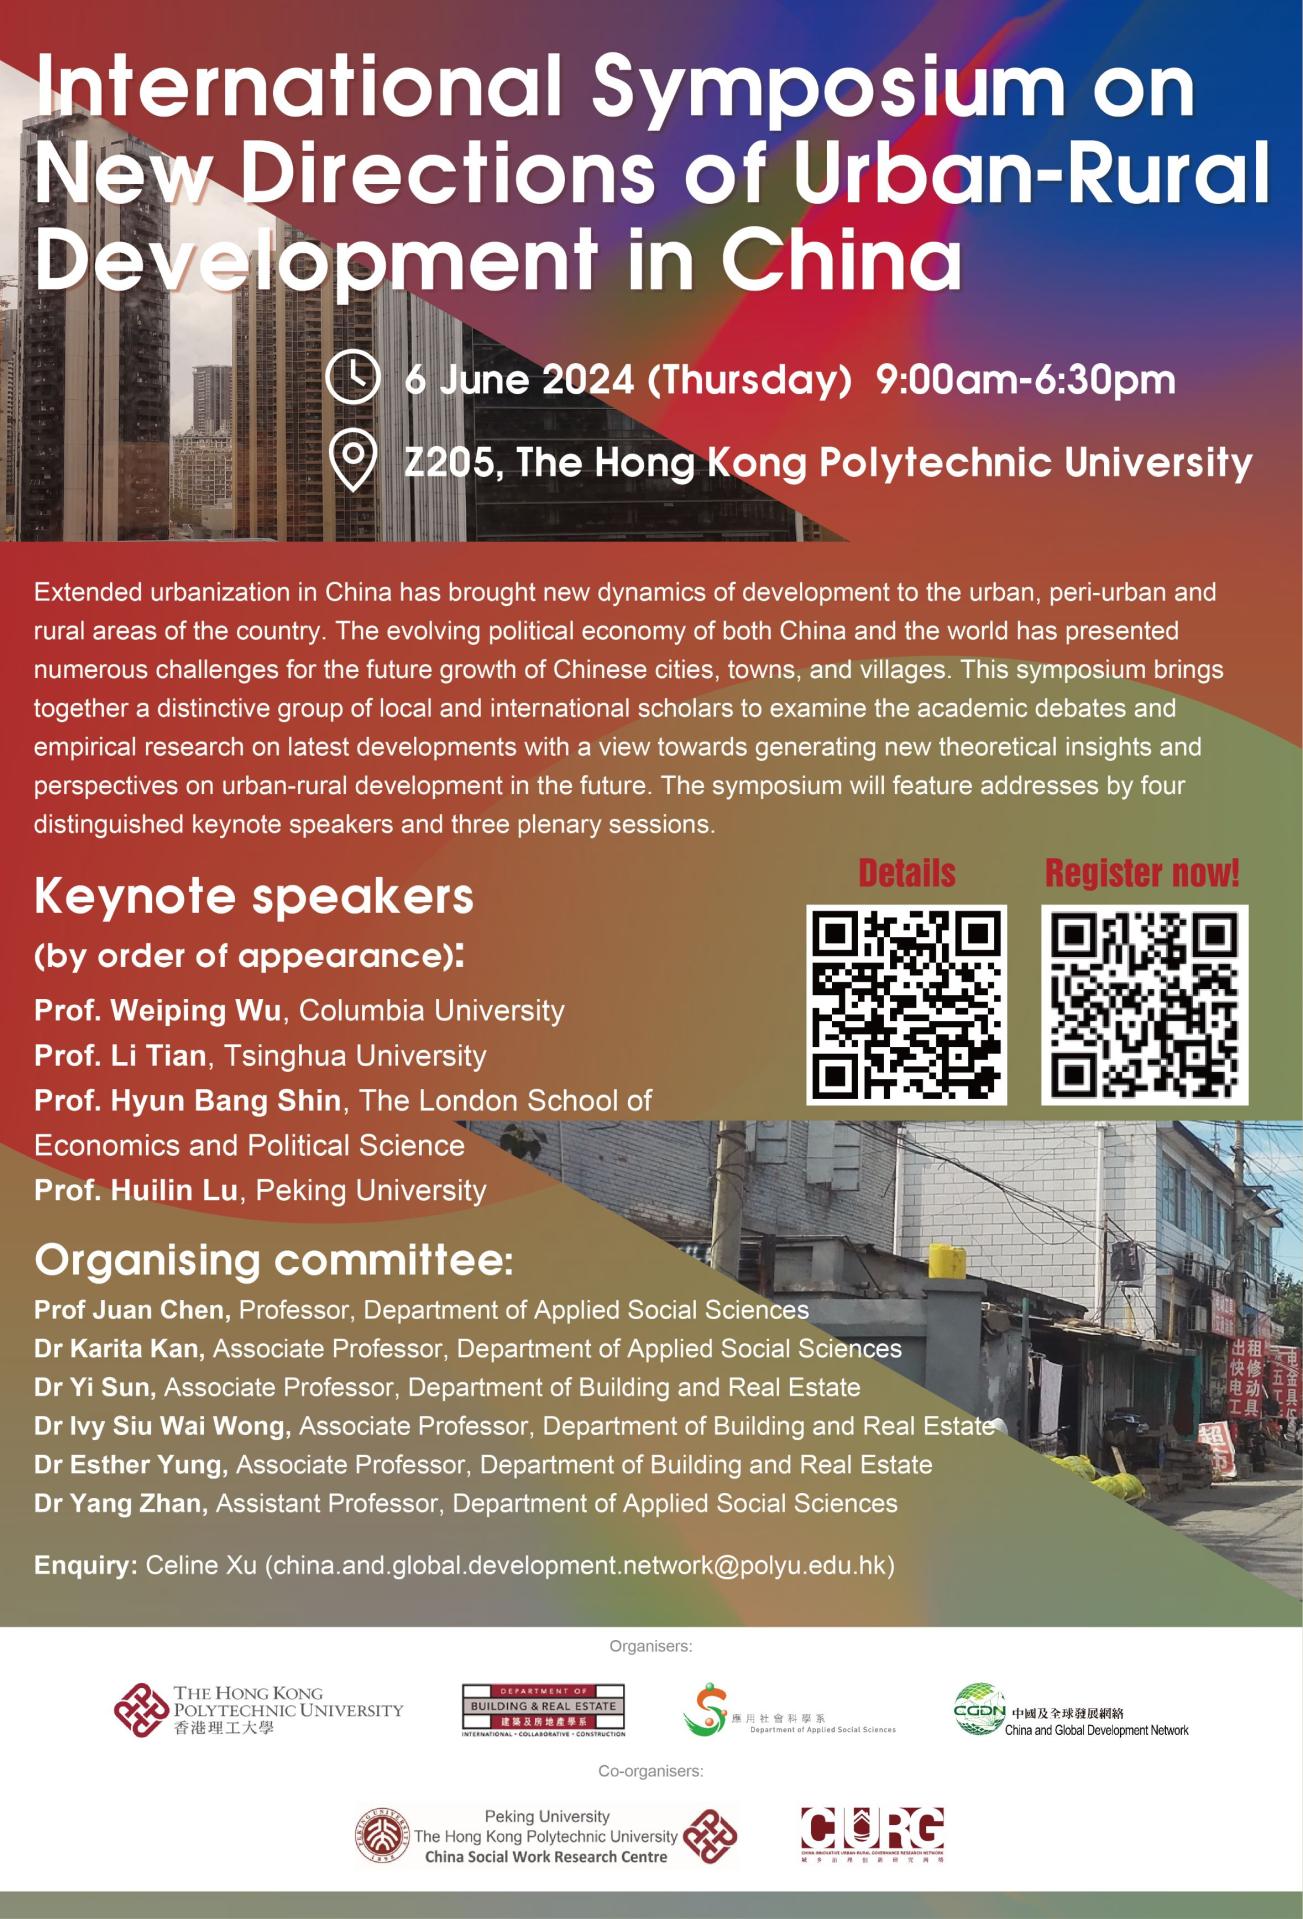 International Symposium on New Directions of Urban-Rural Development in China